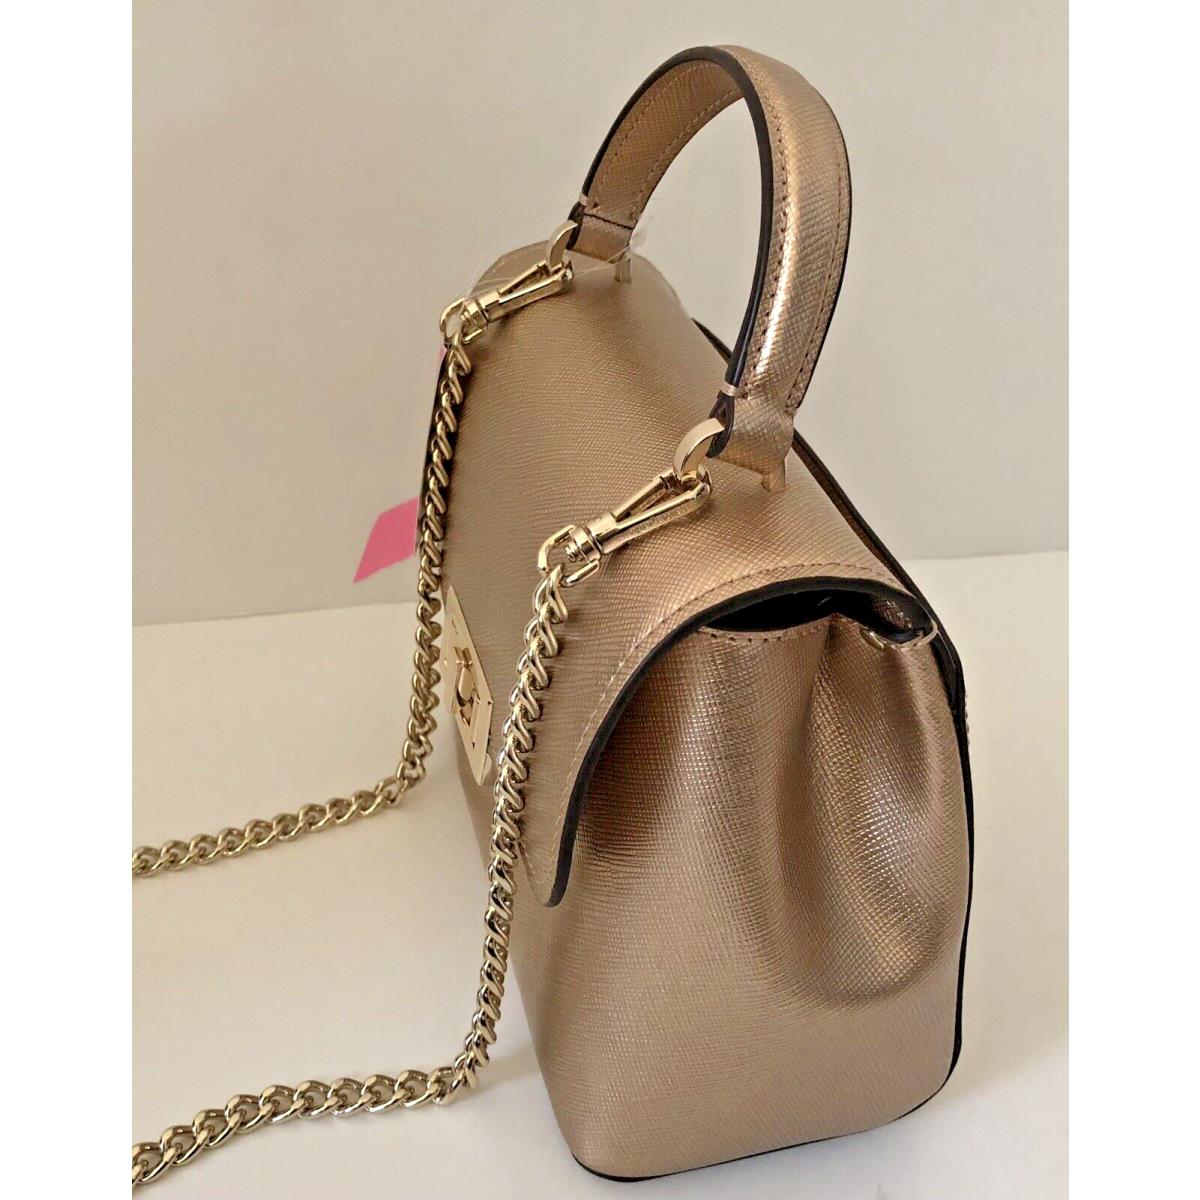 Kate SpadeTinsel/Glitter Tote - Rose Gold for Sale in West Palm Beach, FL -  OfferUp